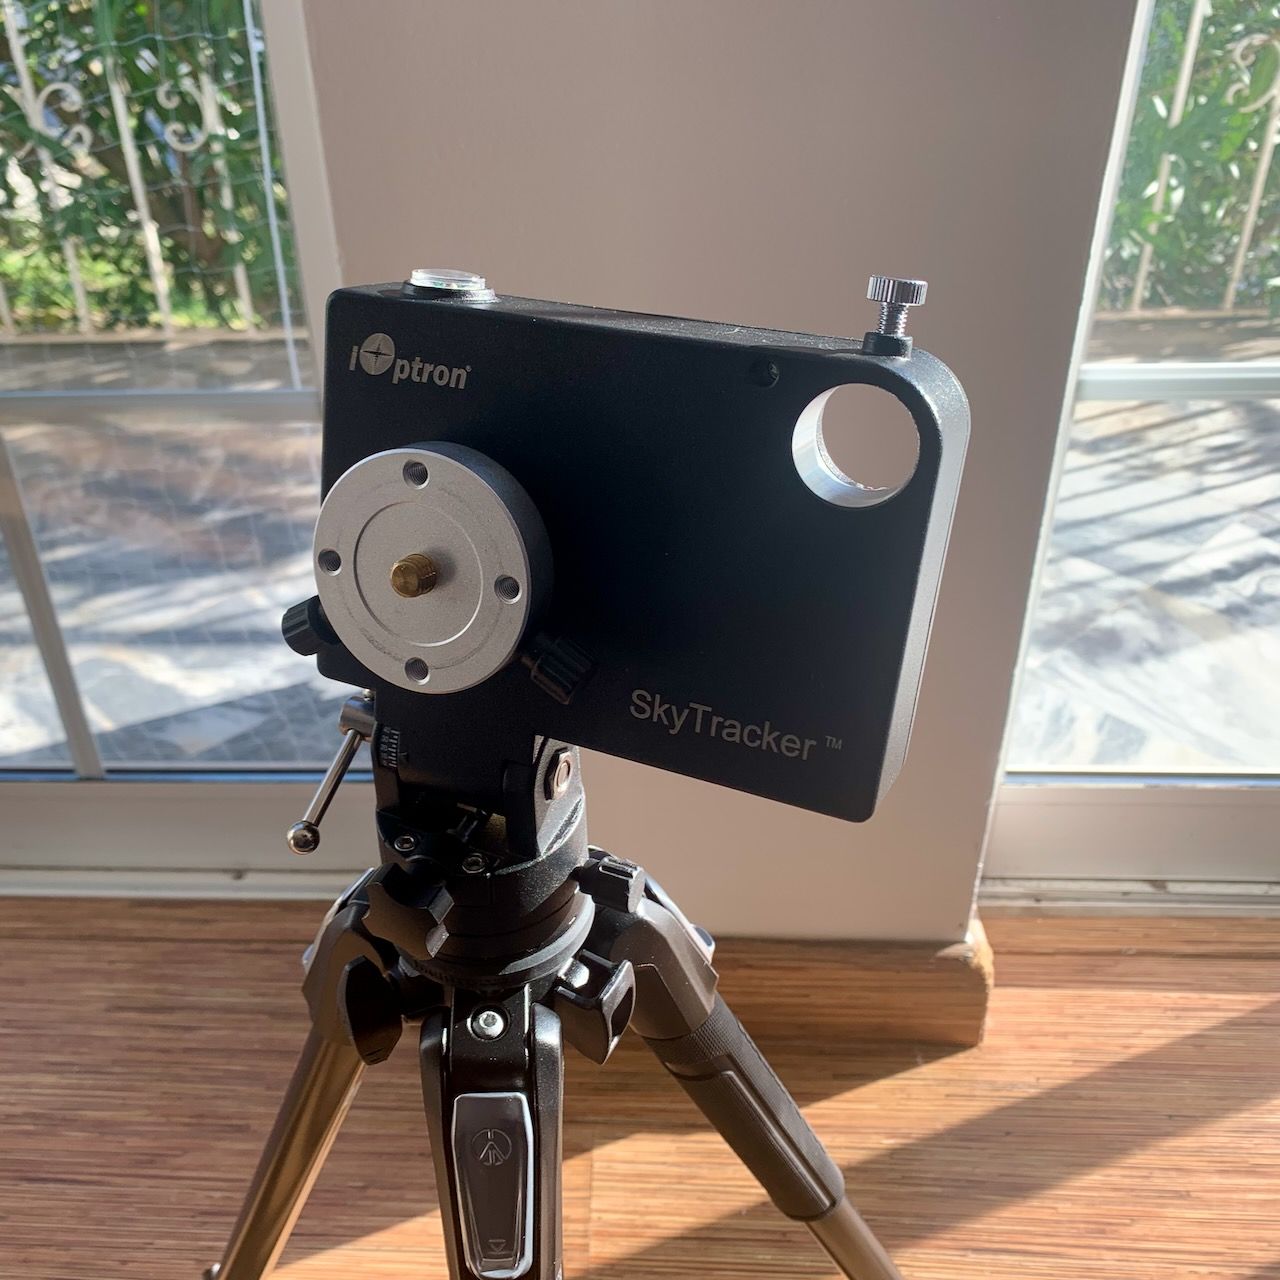 (Re)starting Astrophotography